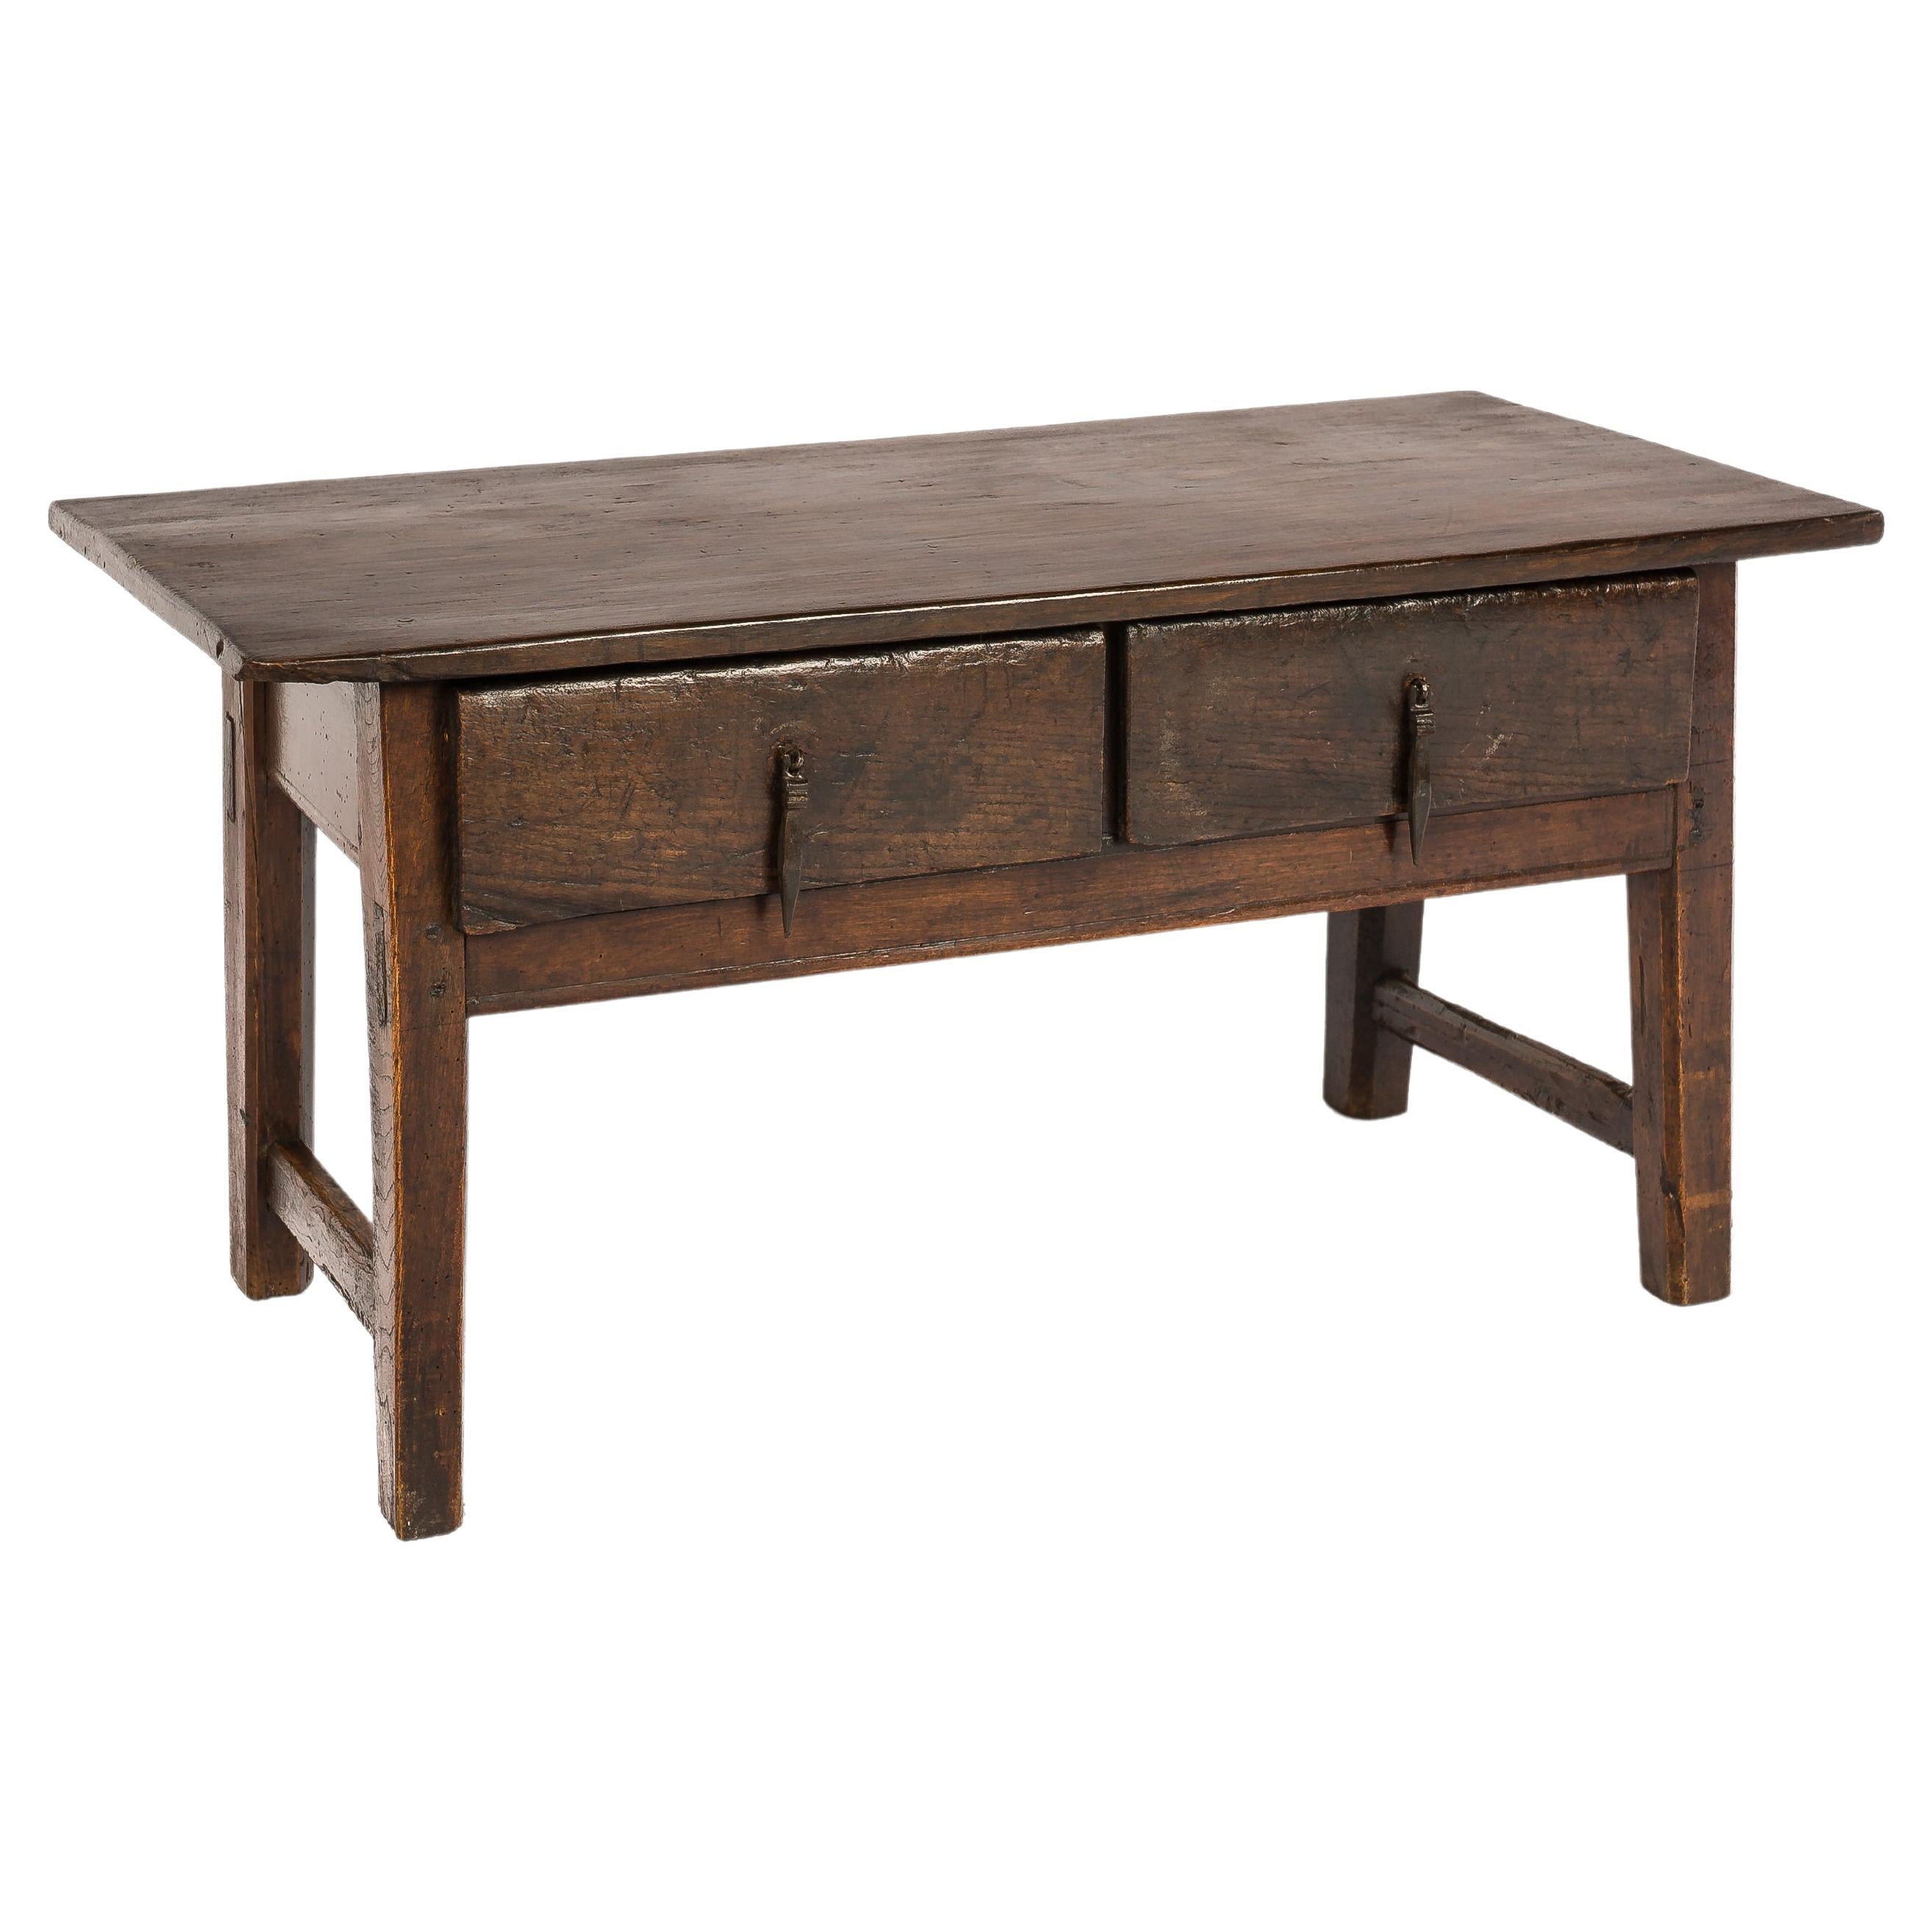 Antique Rural Early 19th Century Warm Brown Spanish Chestnut Coffee Table For Sale